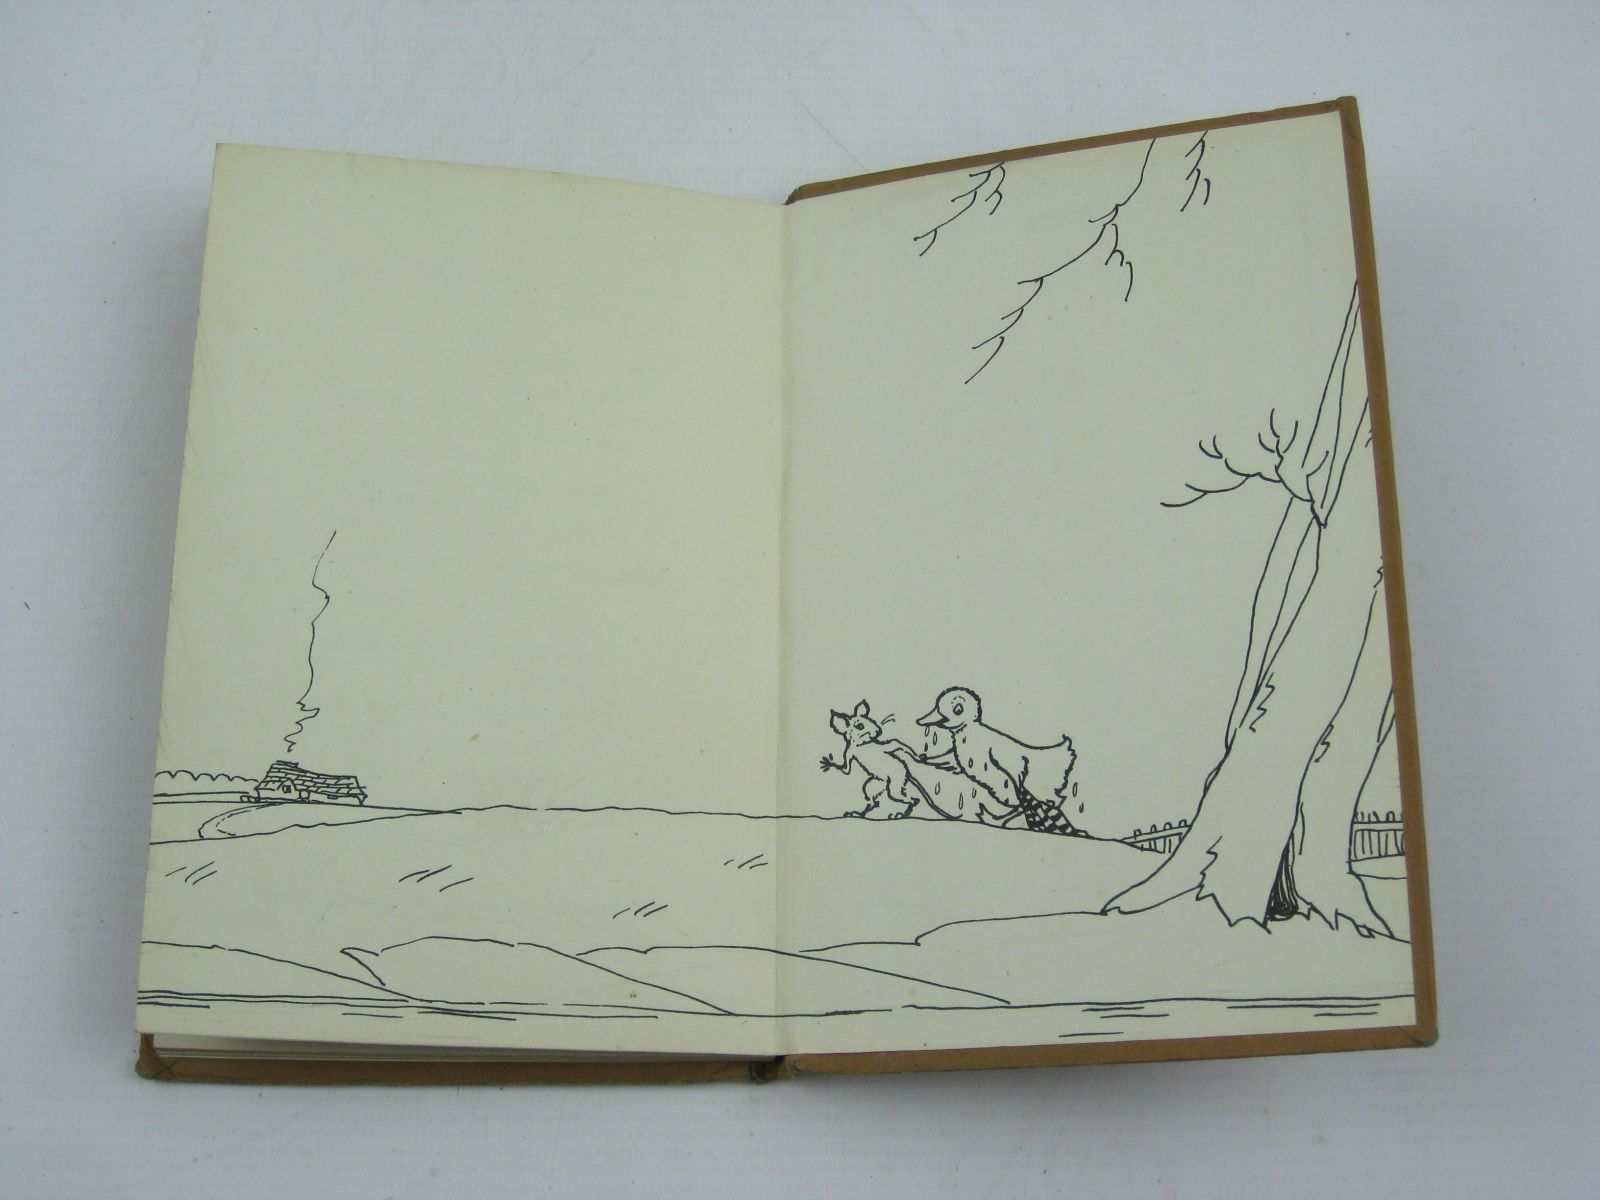 Photo of DOWNY DUCKLING written by Macgregor, A.J.
Perring, W. illustrated by Macgregor, A.J. published by Wills & Hepworth Ltd. (STOCK CODE: 1406986)  for sale by Stella & Rose's Books